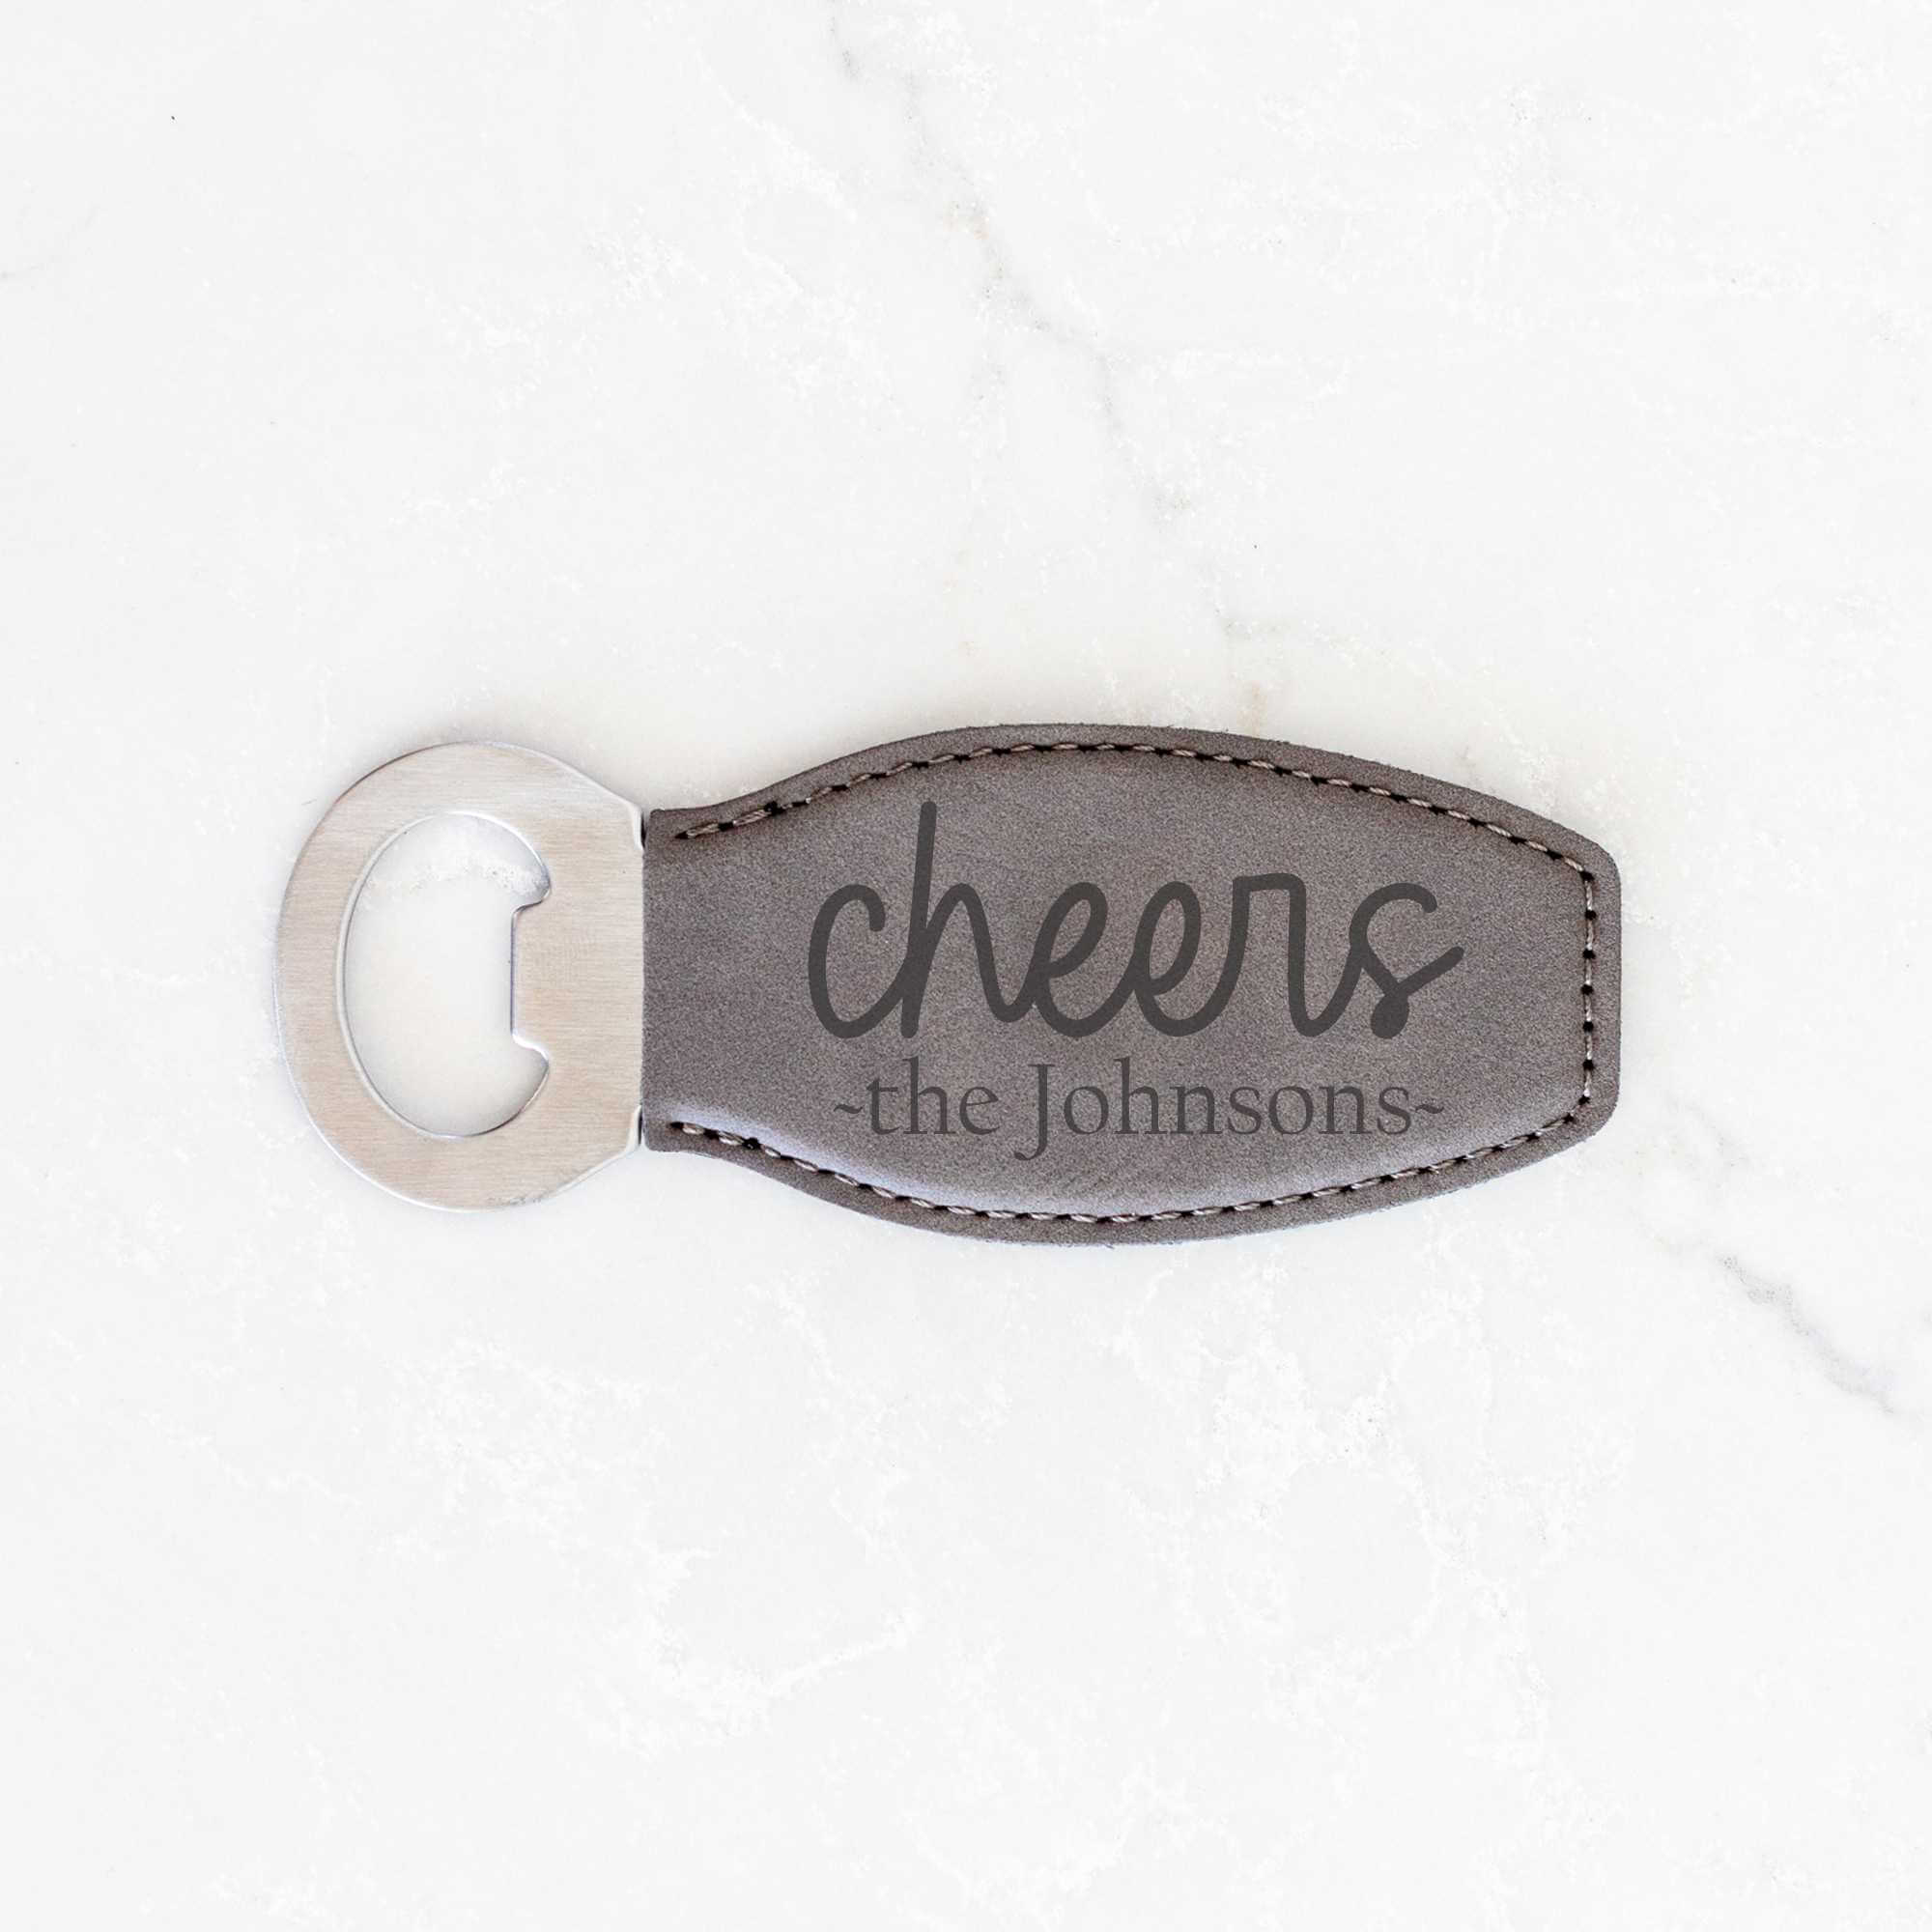 Cheers - Personalized Bottle Opener with Magnet